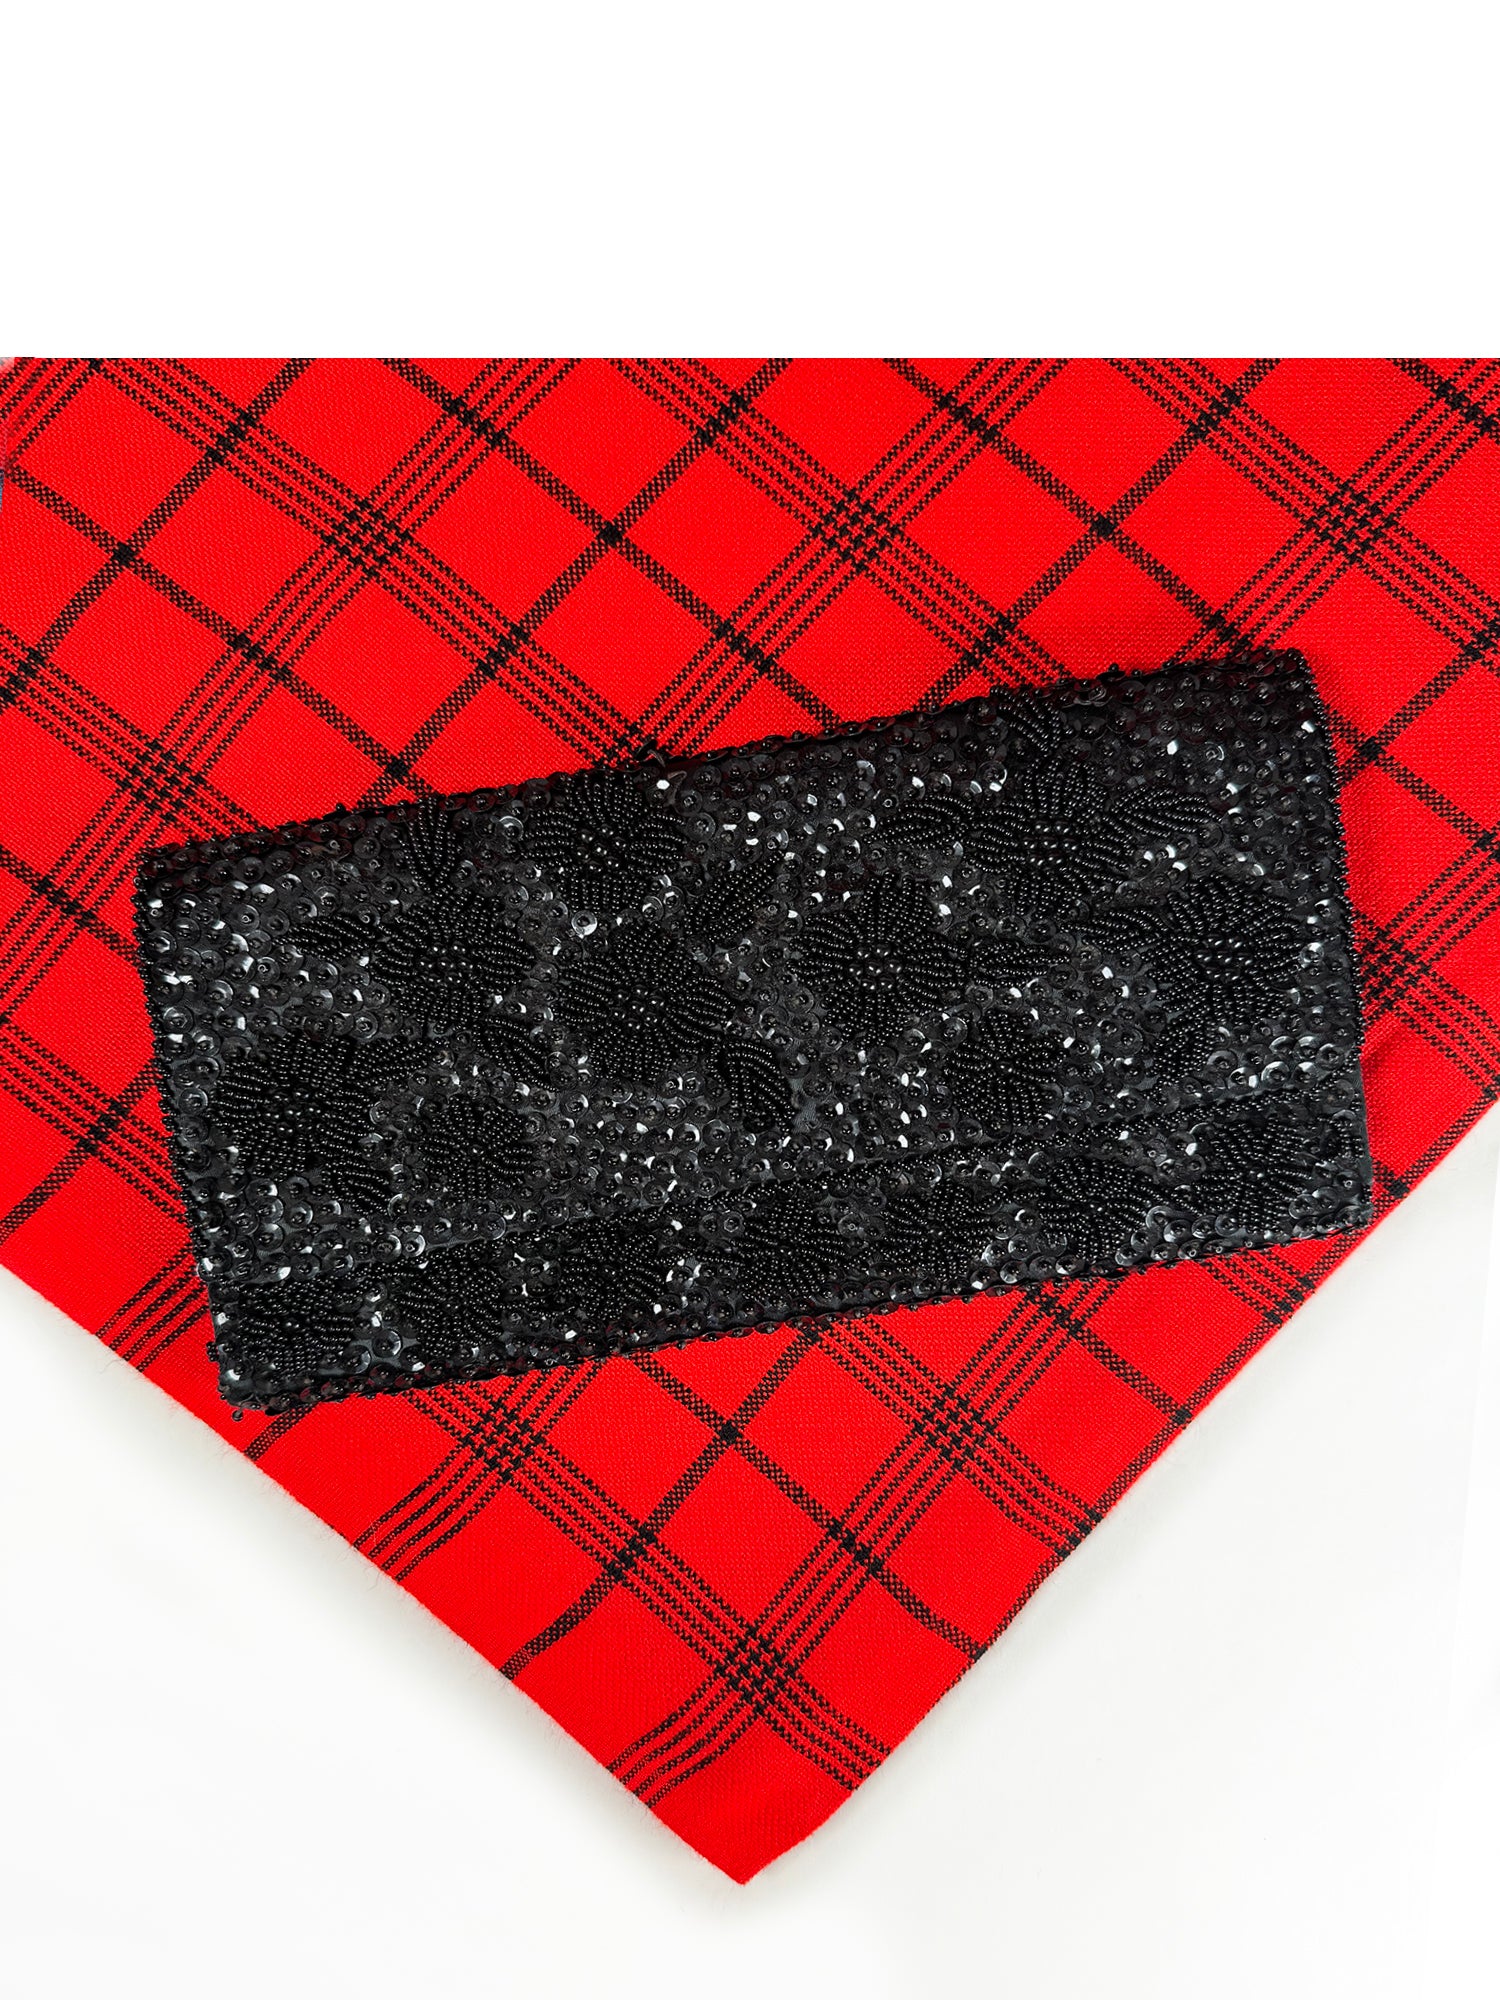 Black Beaded Clutch - Late to the Party